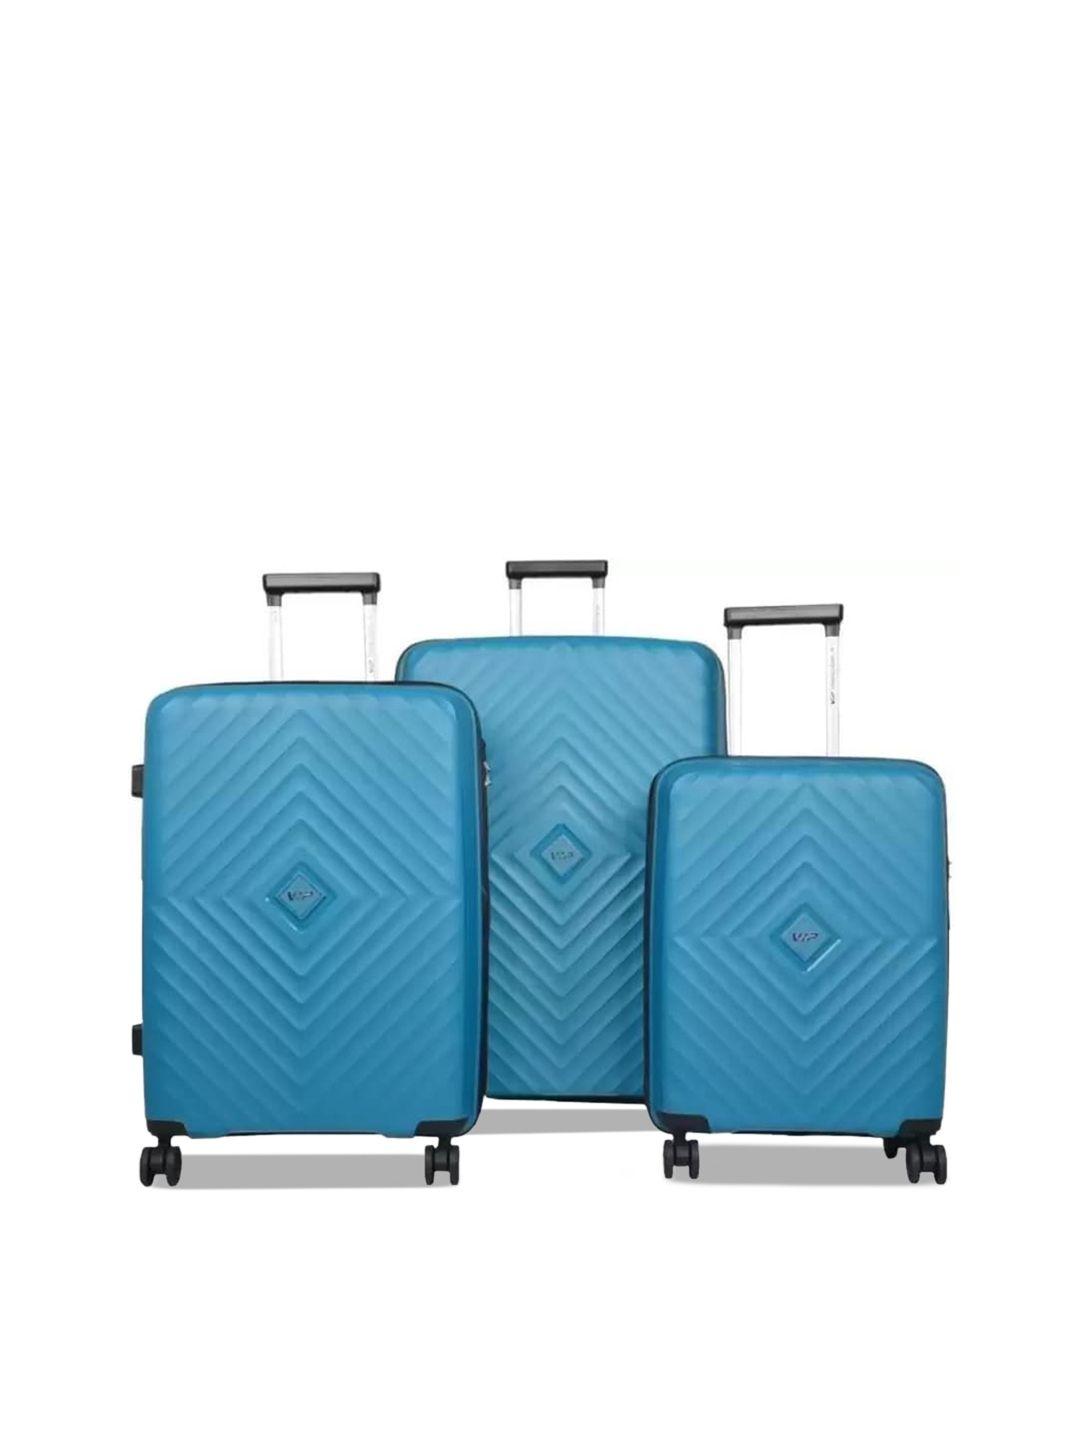 vip set of 3 hard-sided trolley suitcases